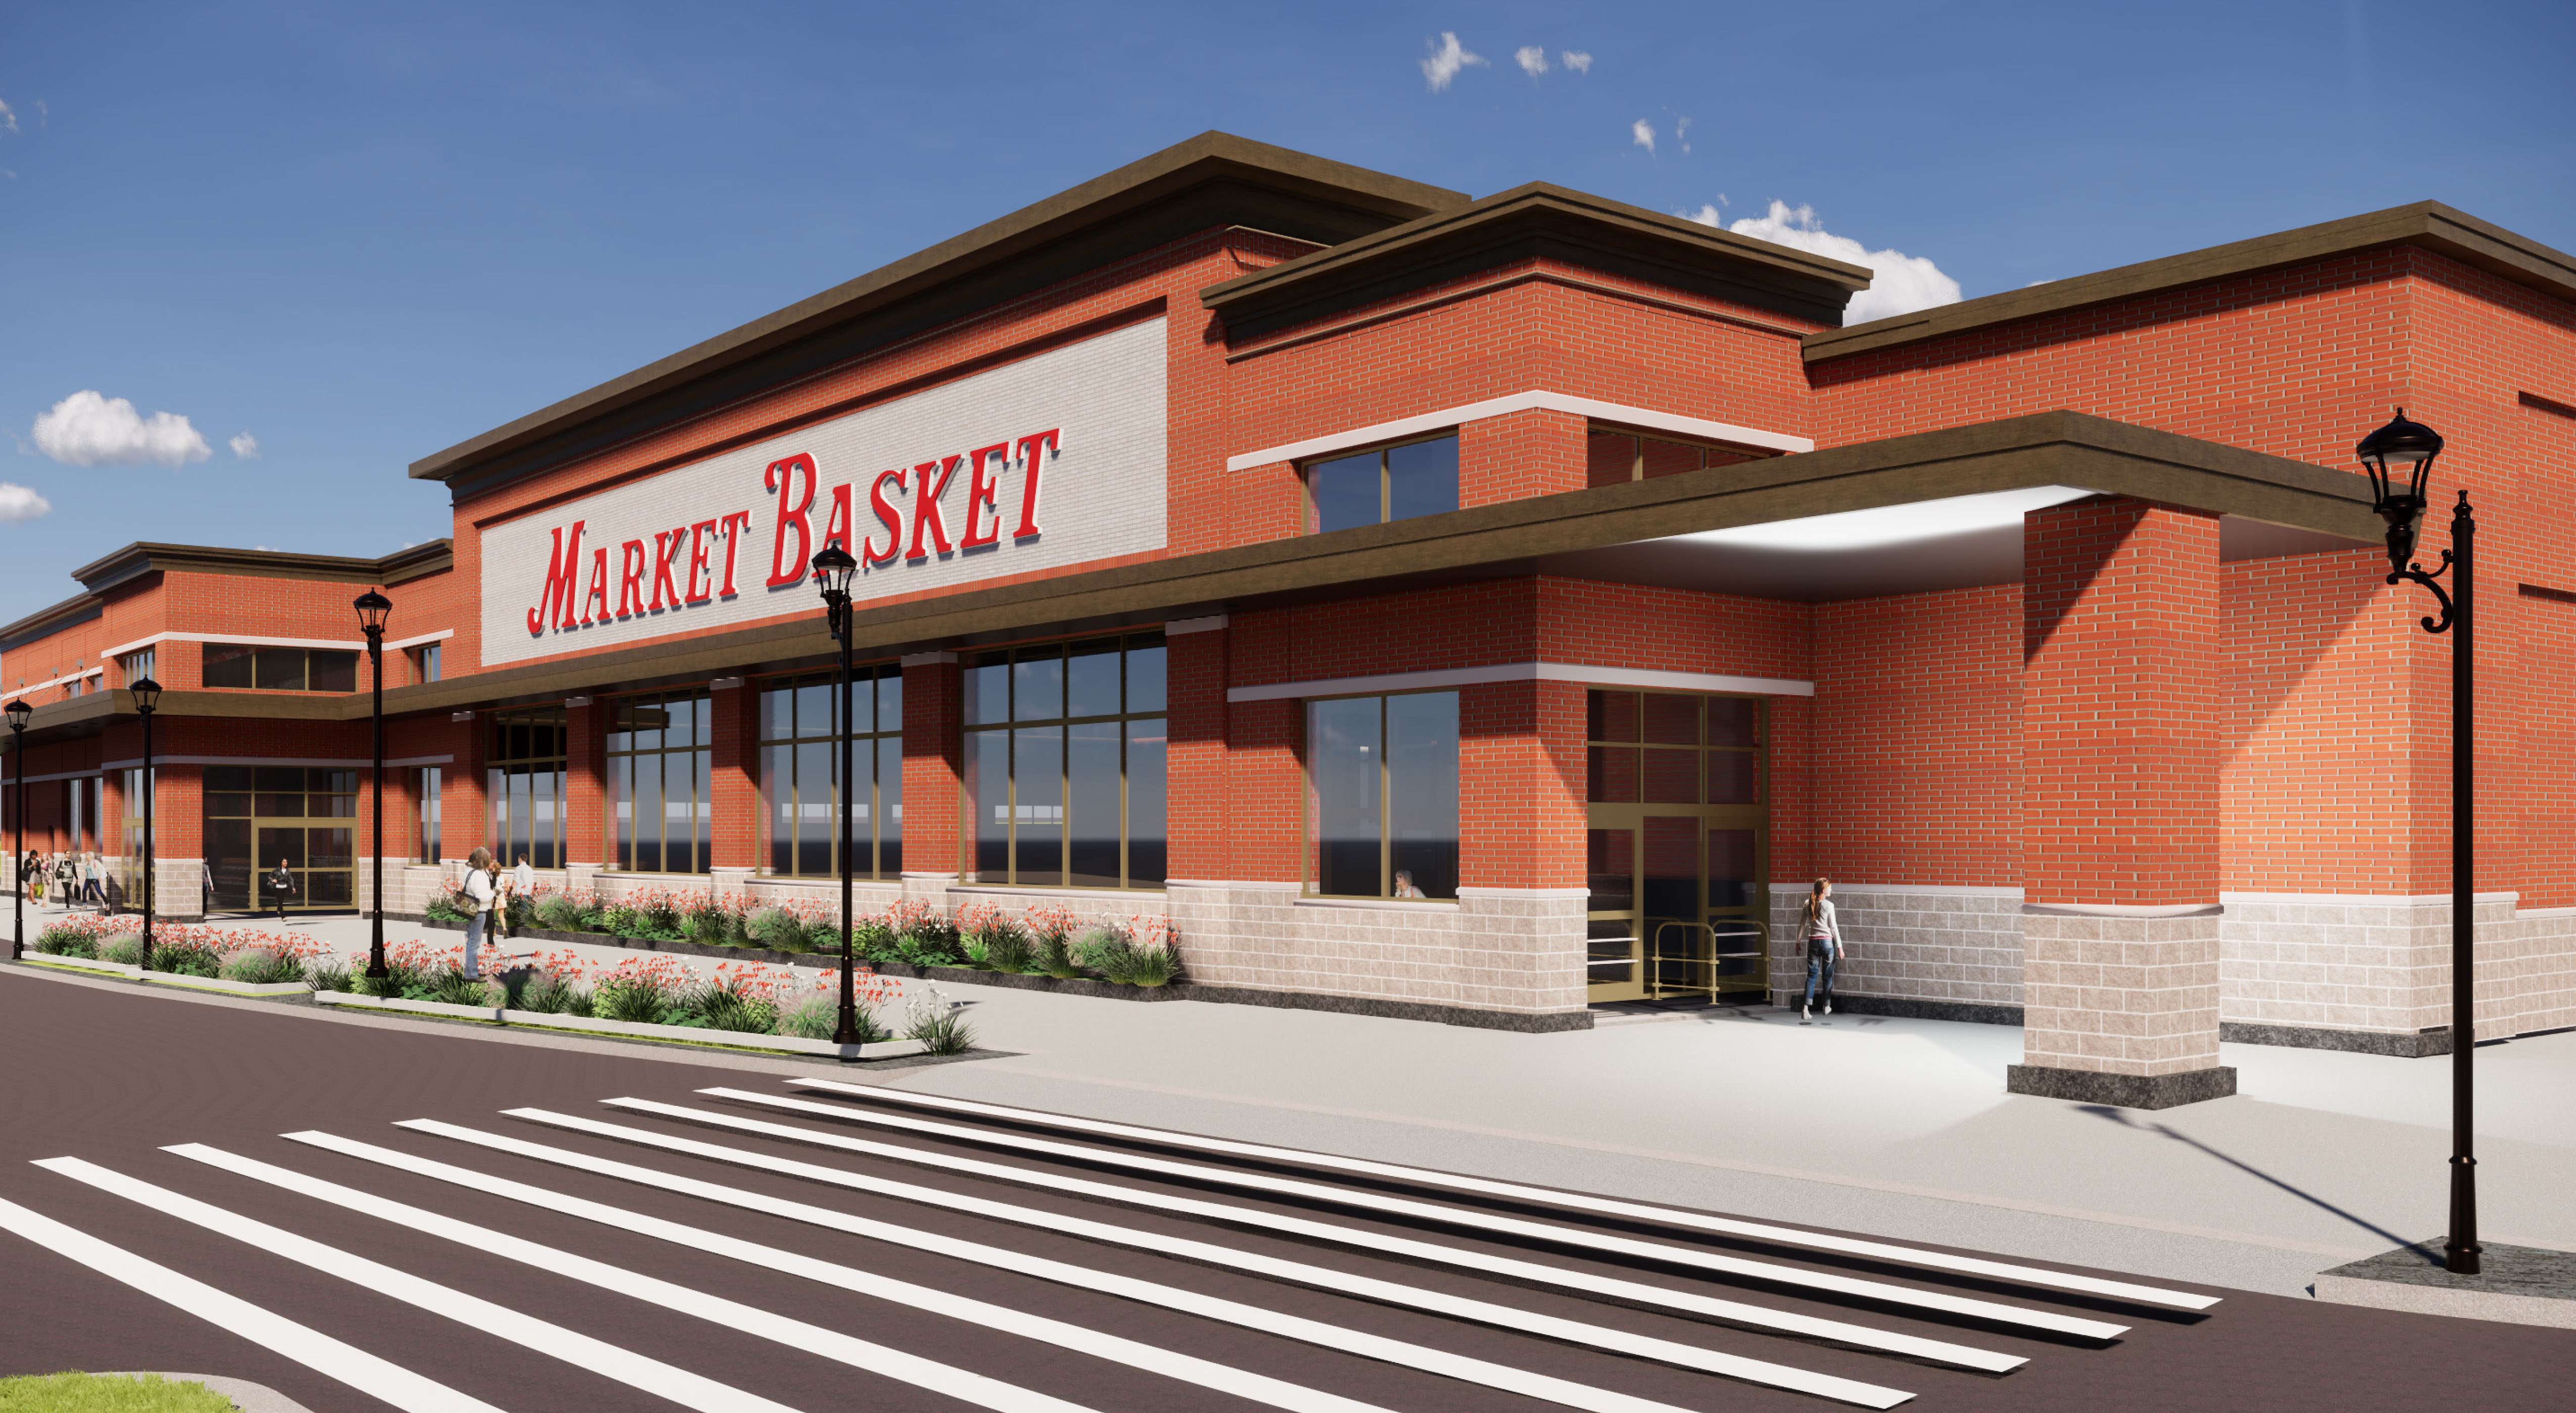 Eat Up New England: INSIDE THE NEW MARKET BASKET IN WALTHAM